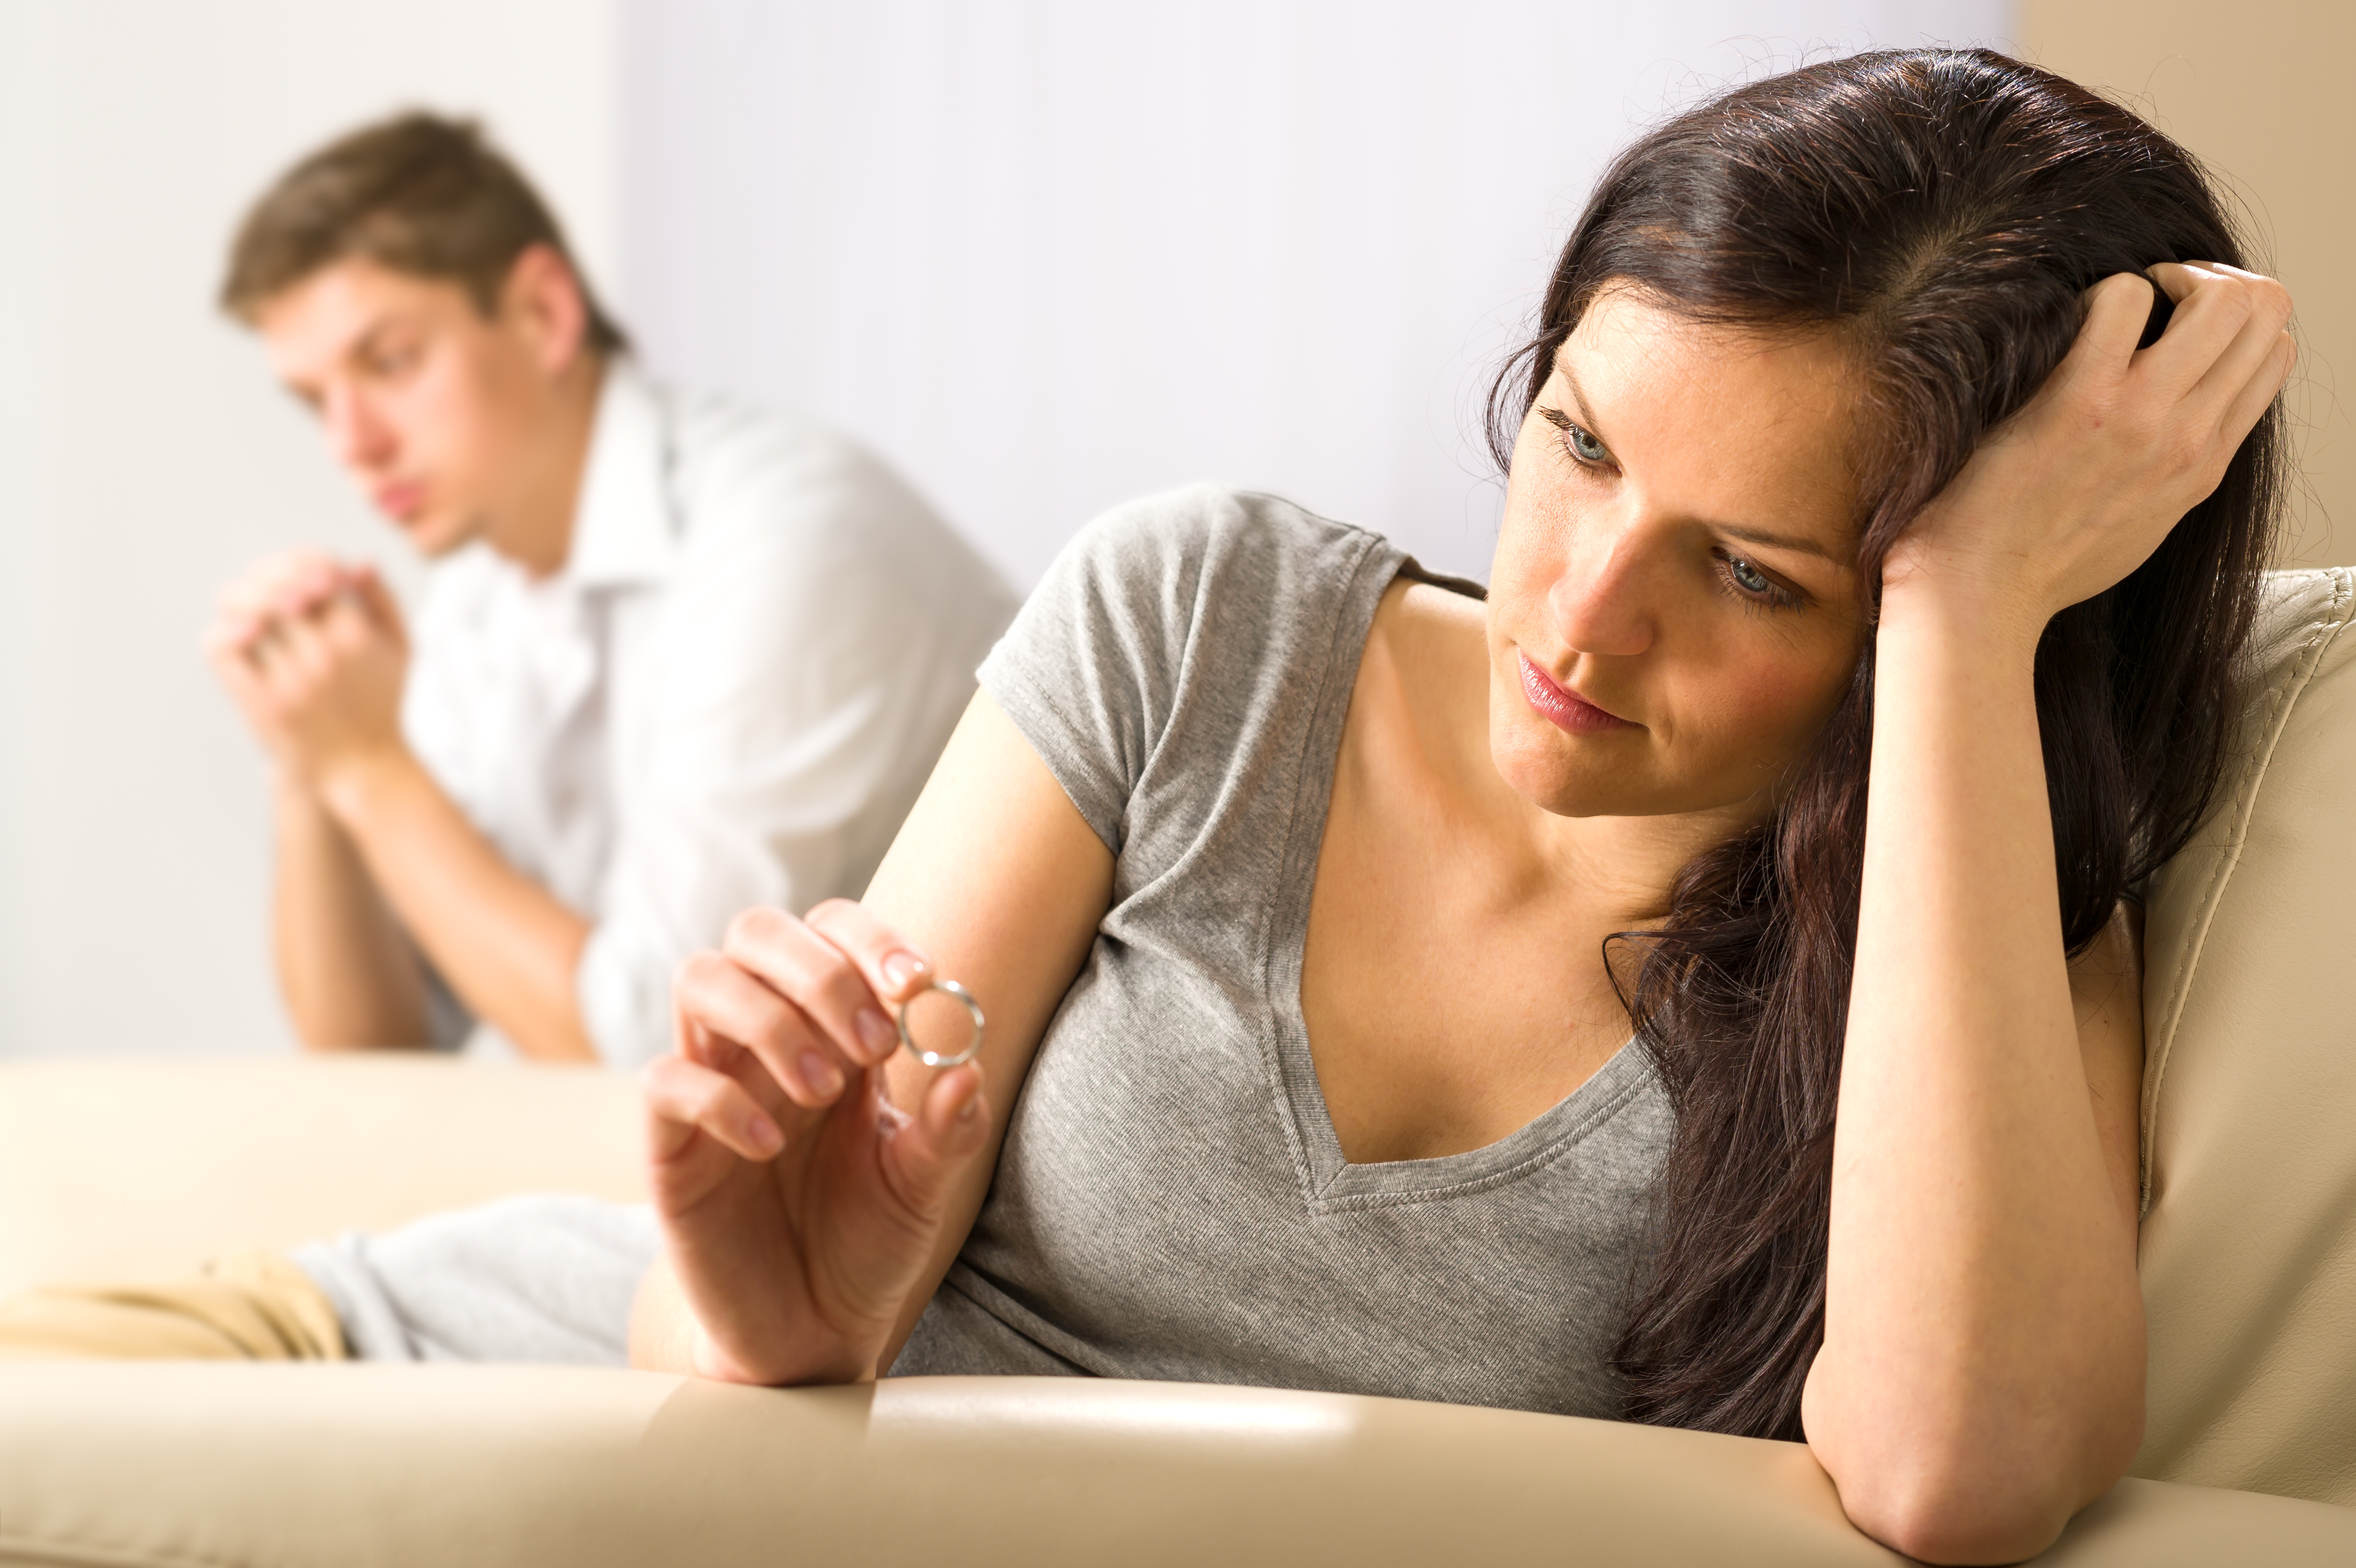 What are the divorce laws in Maryland?